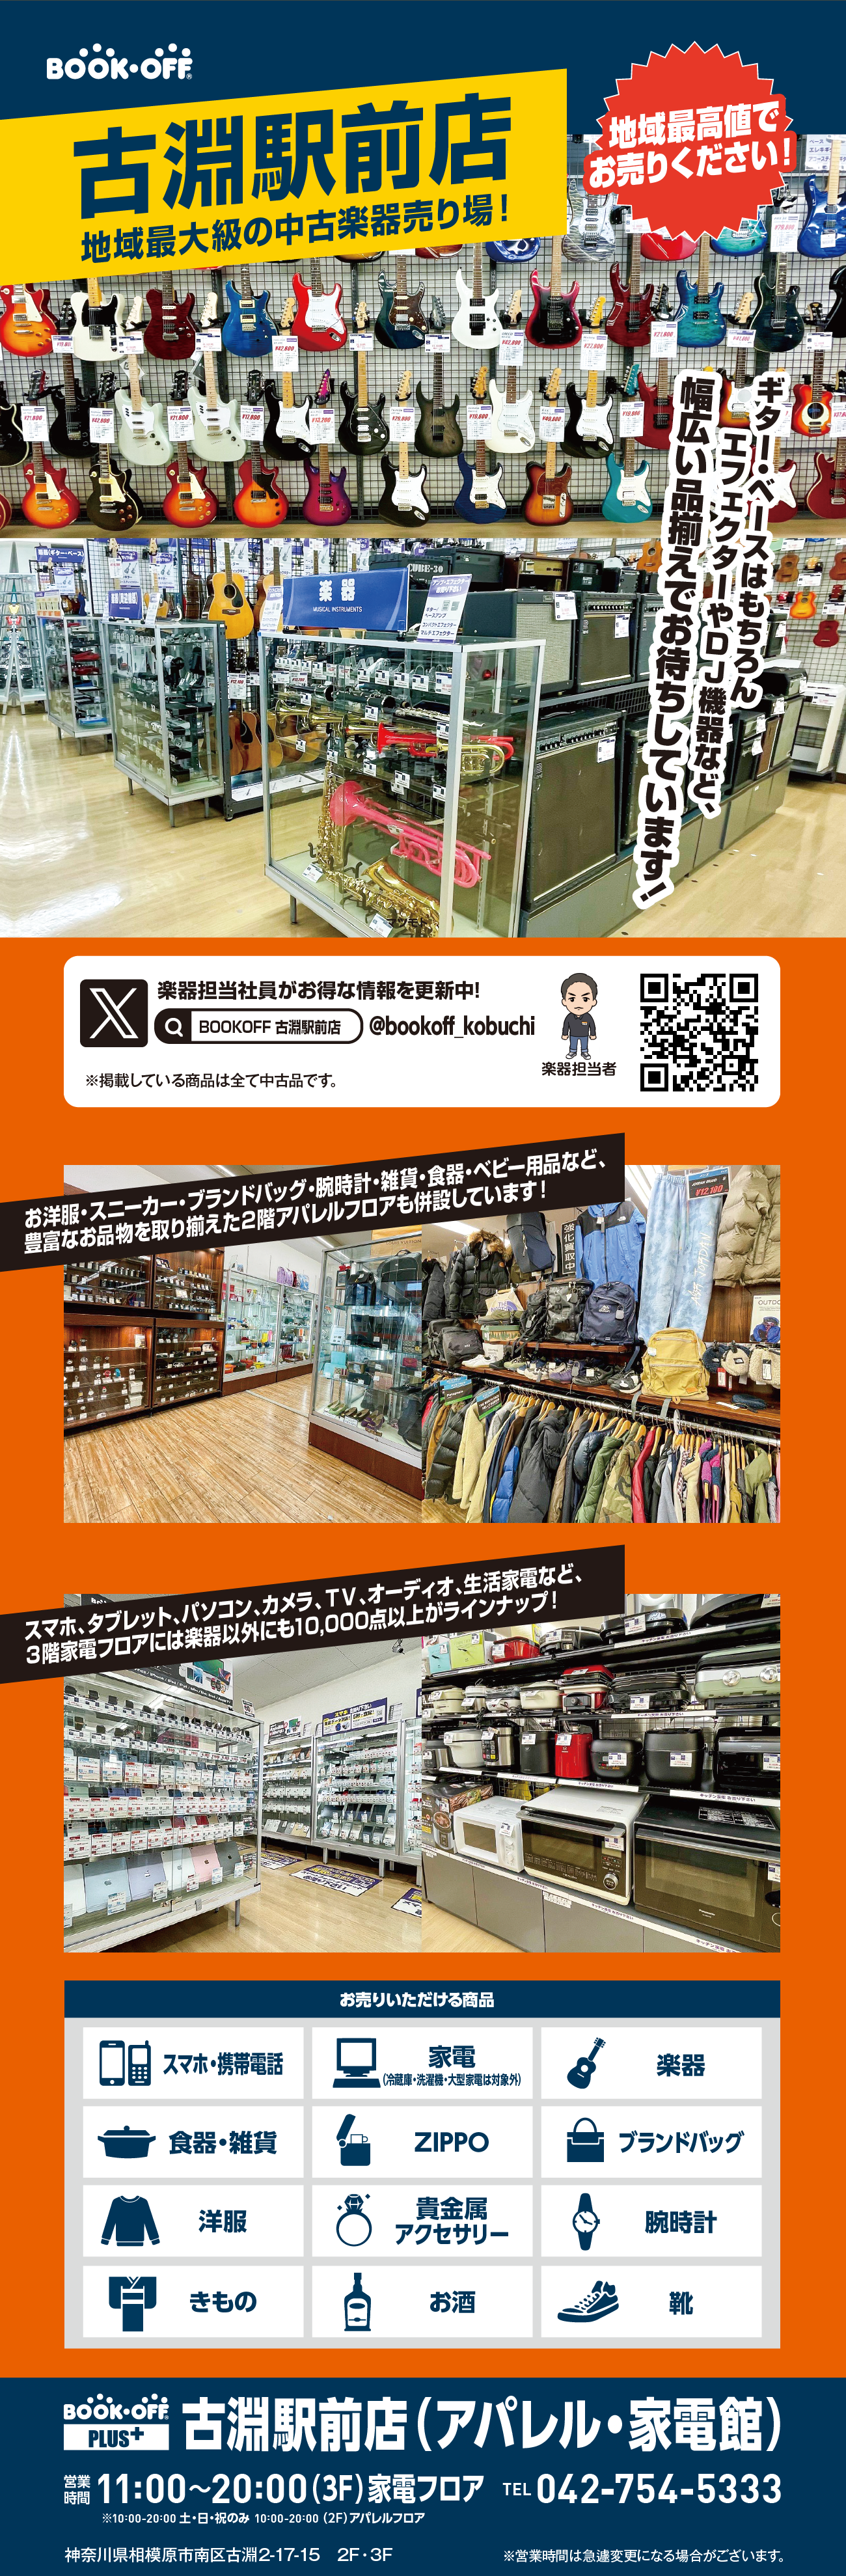 BOOKOFF PLUS 古淵駅前店（アパレル・家電館）楽器売場が見逃せない♪